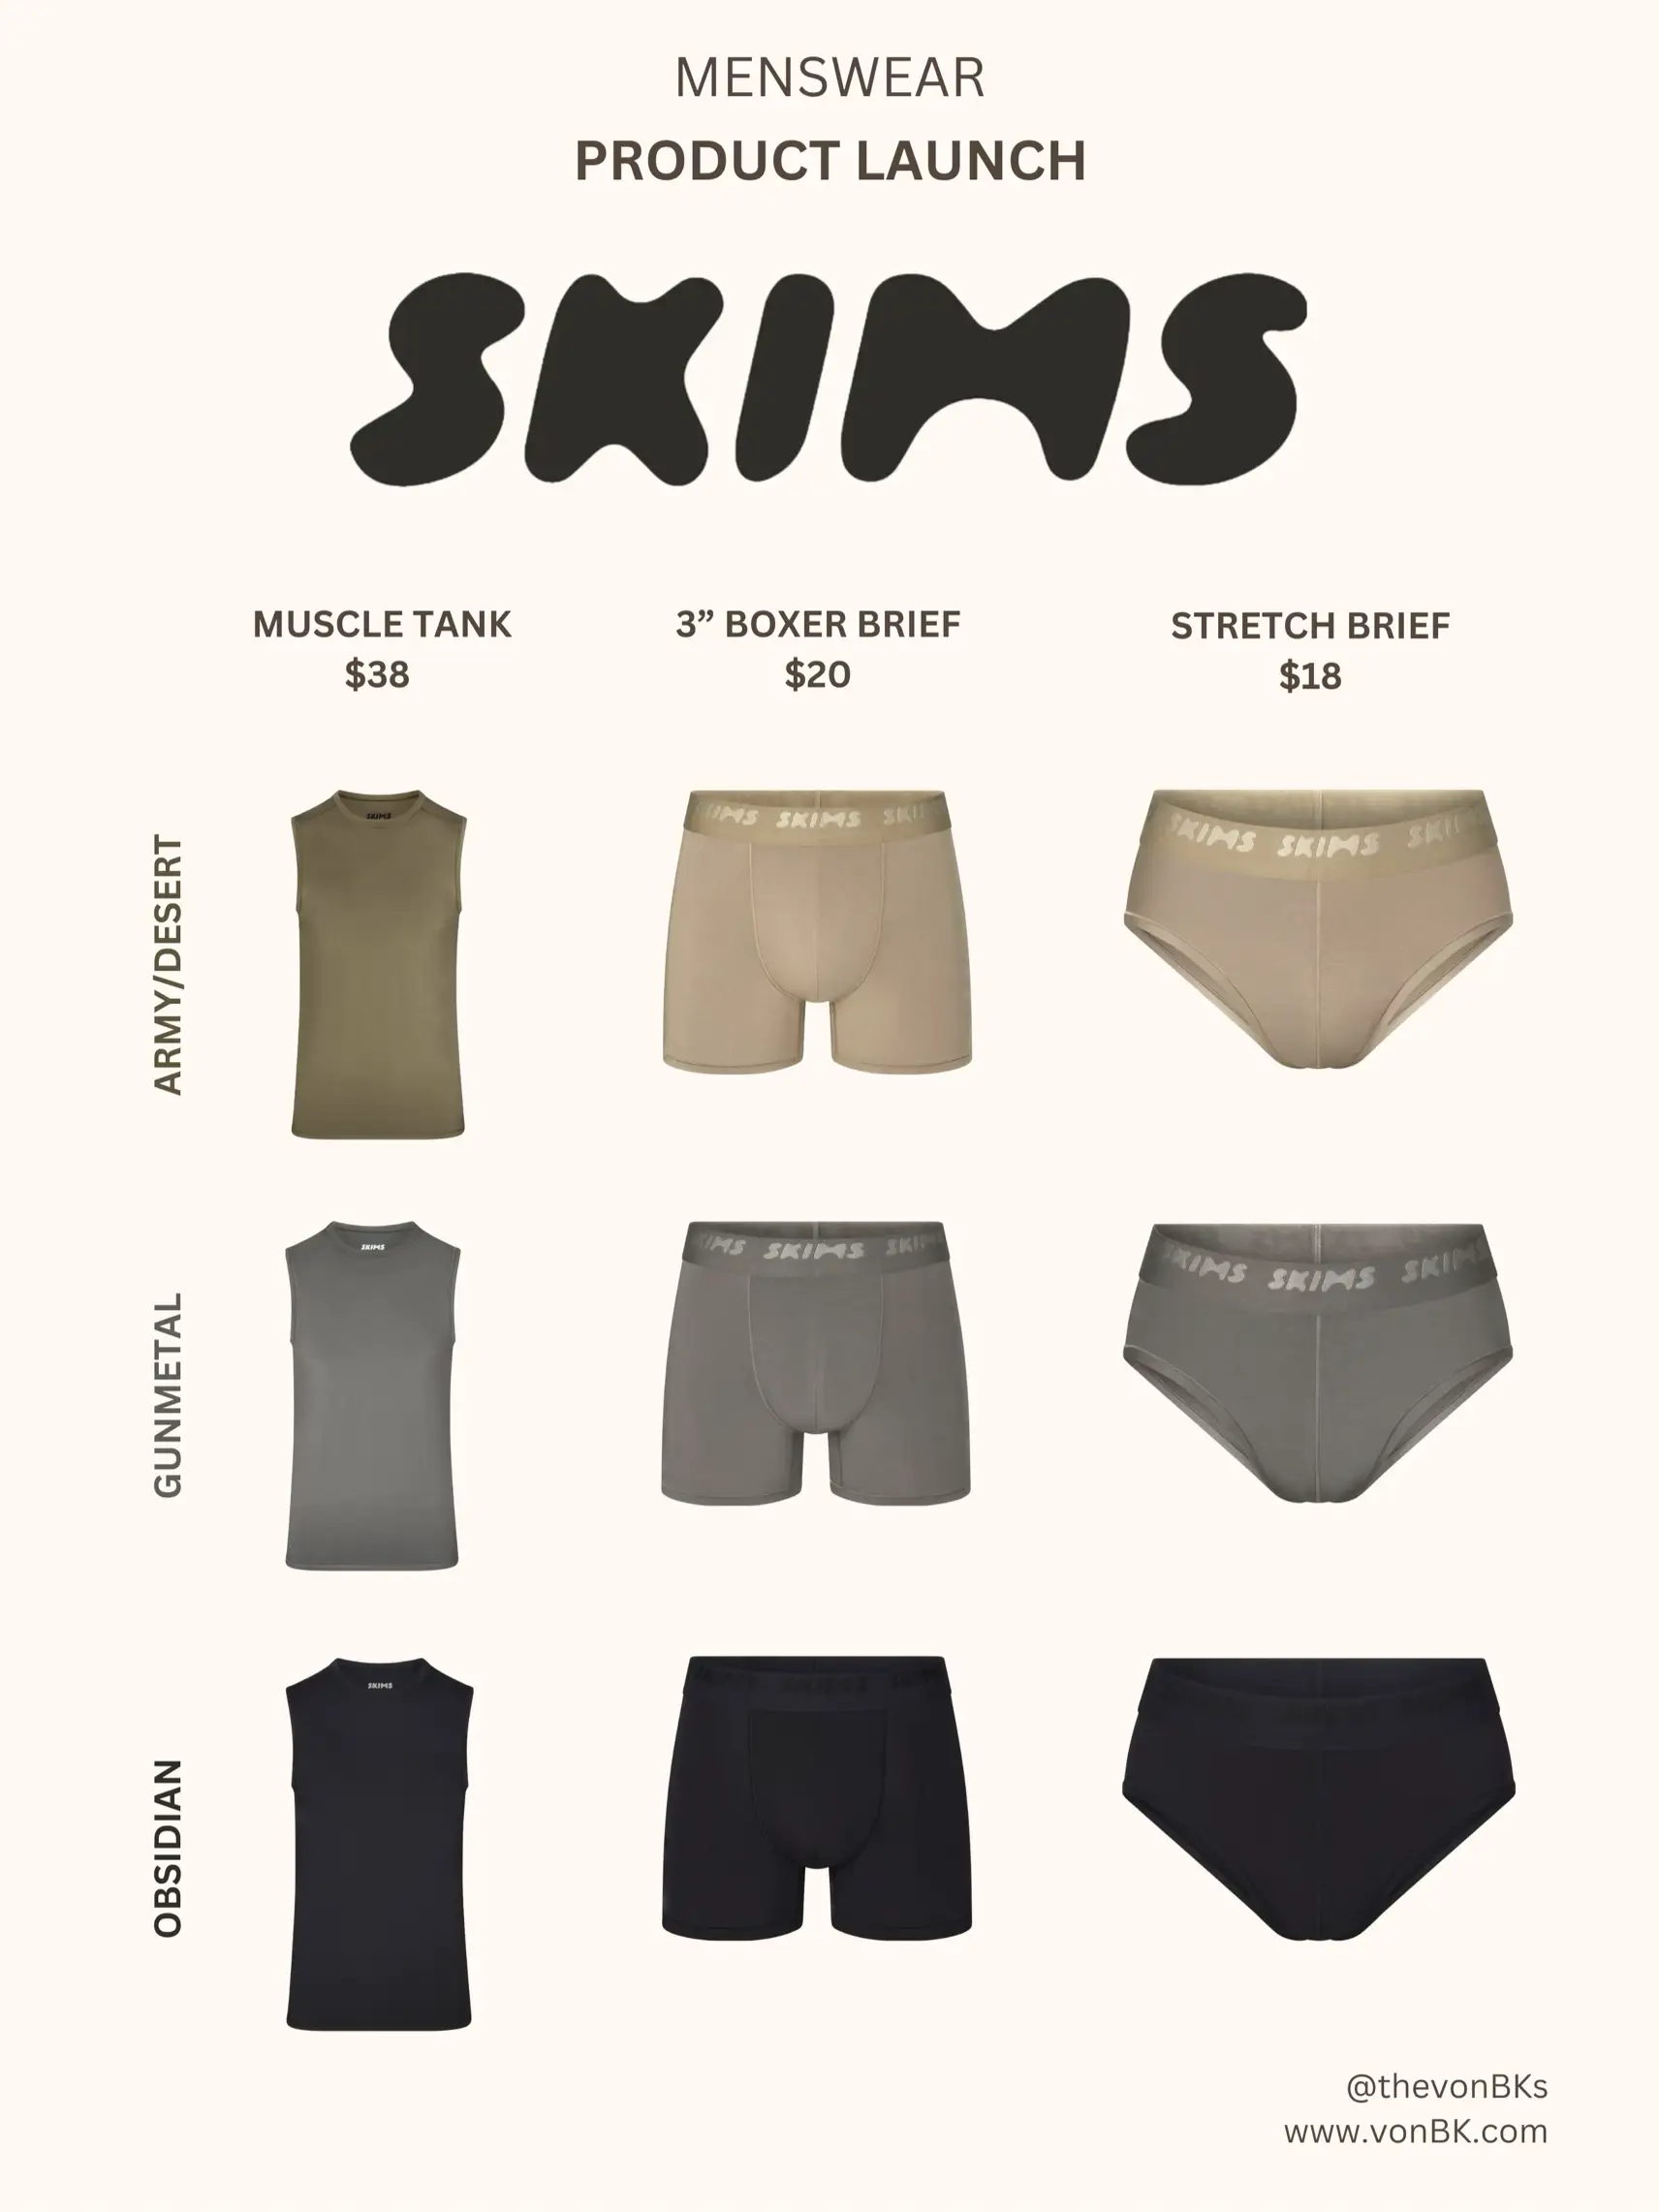 SKIMS for men is here!, Gallery posted by The vonBKs